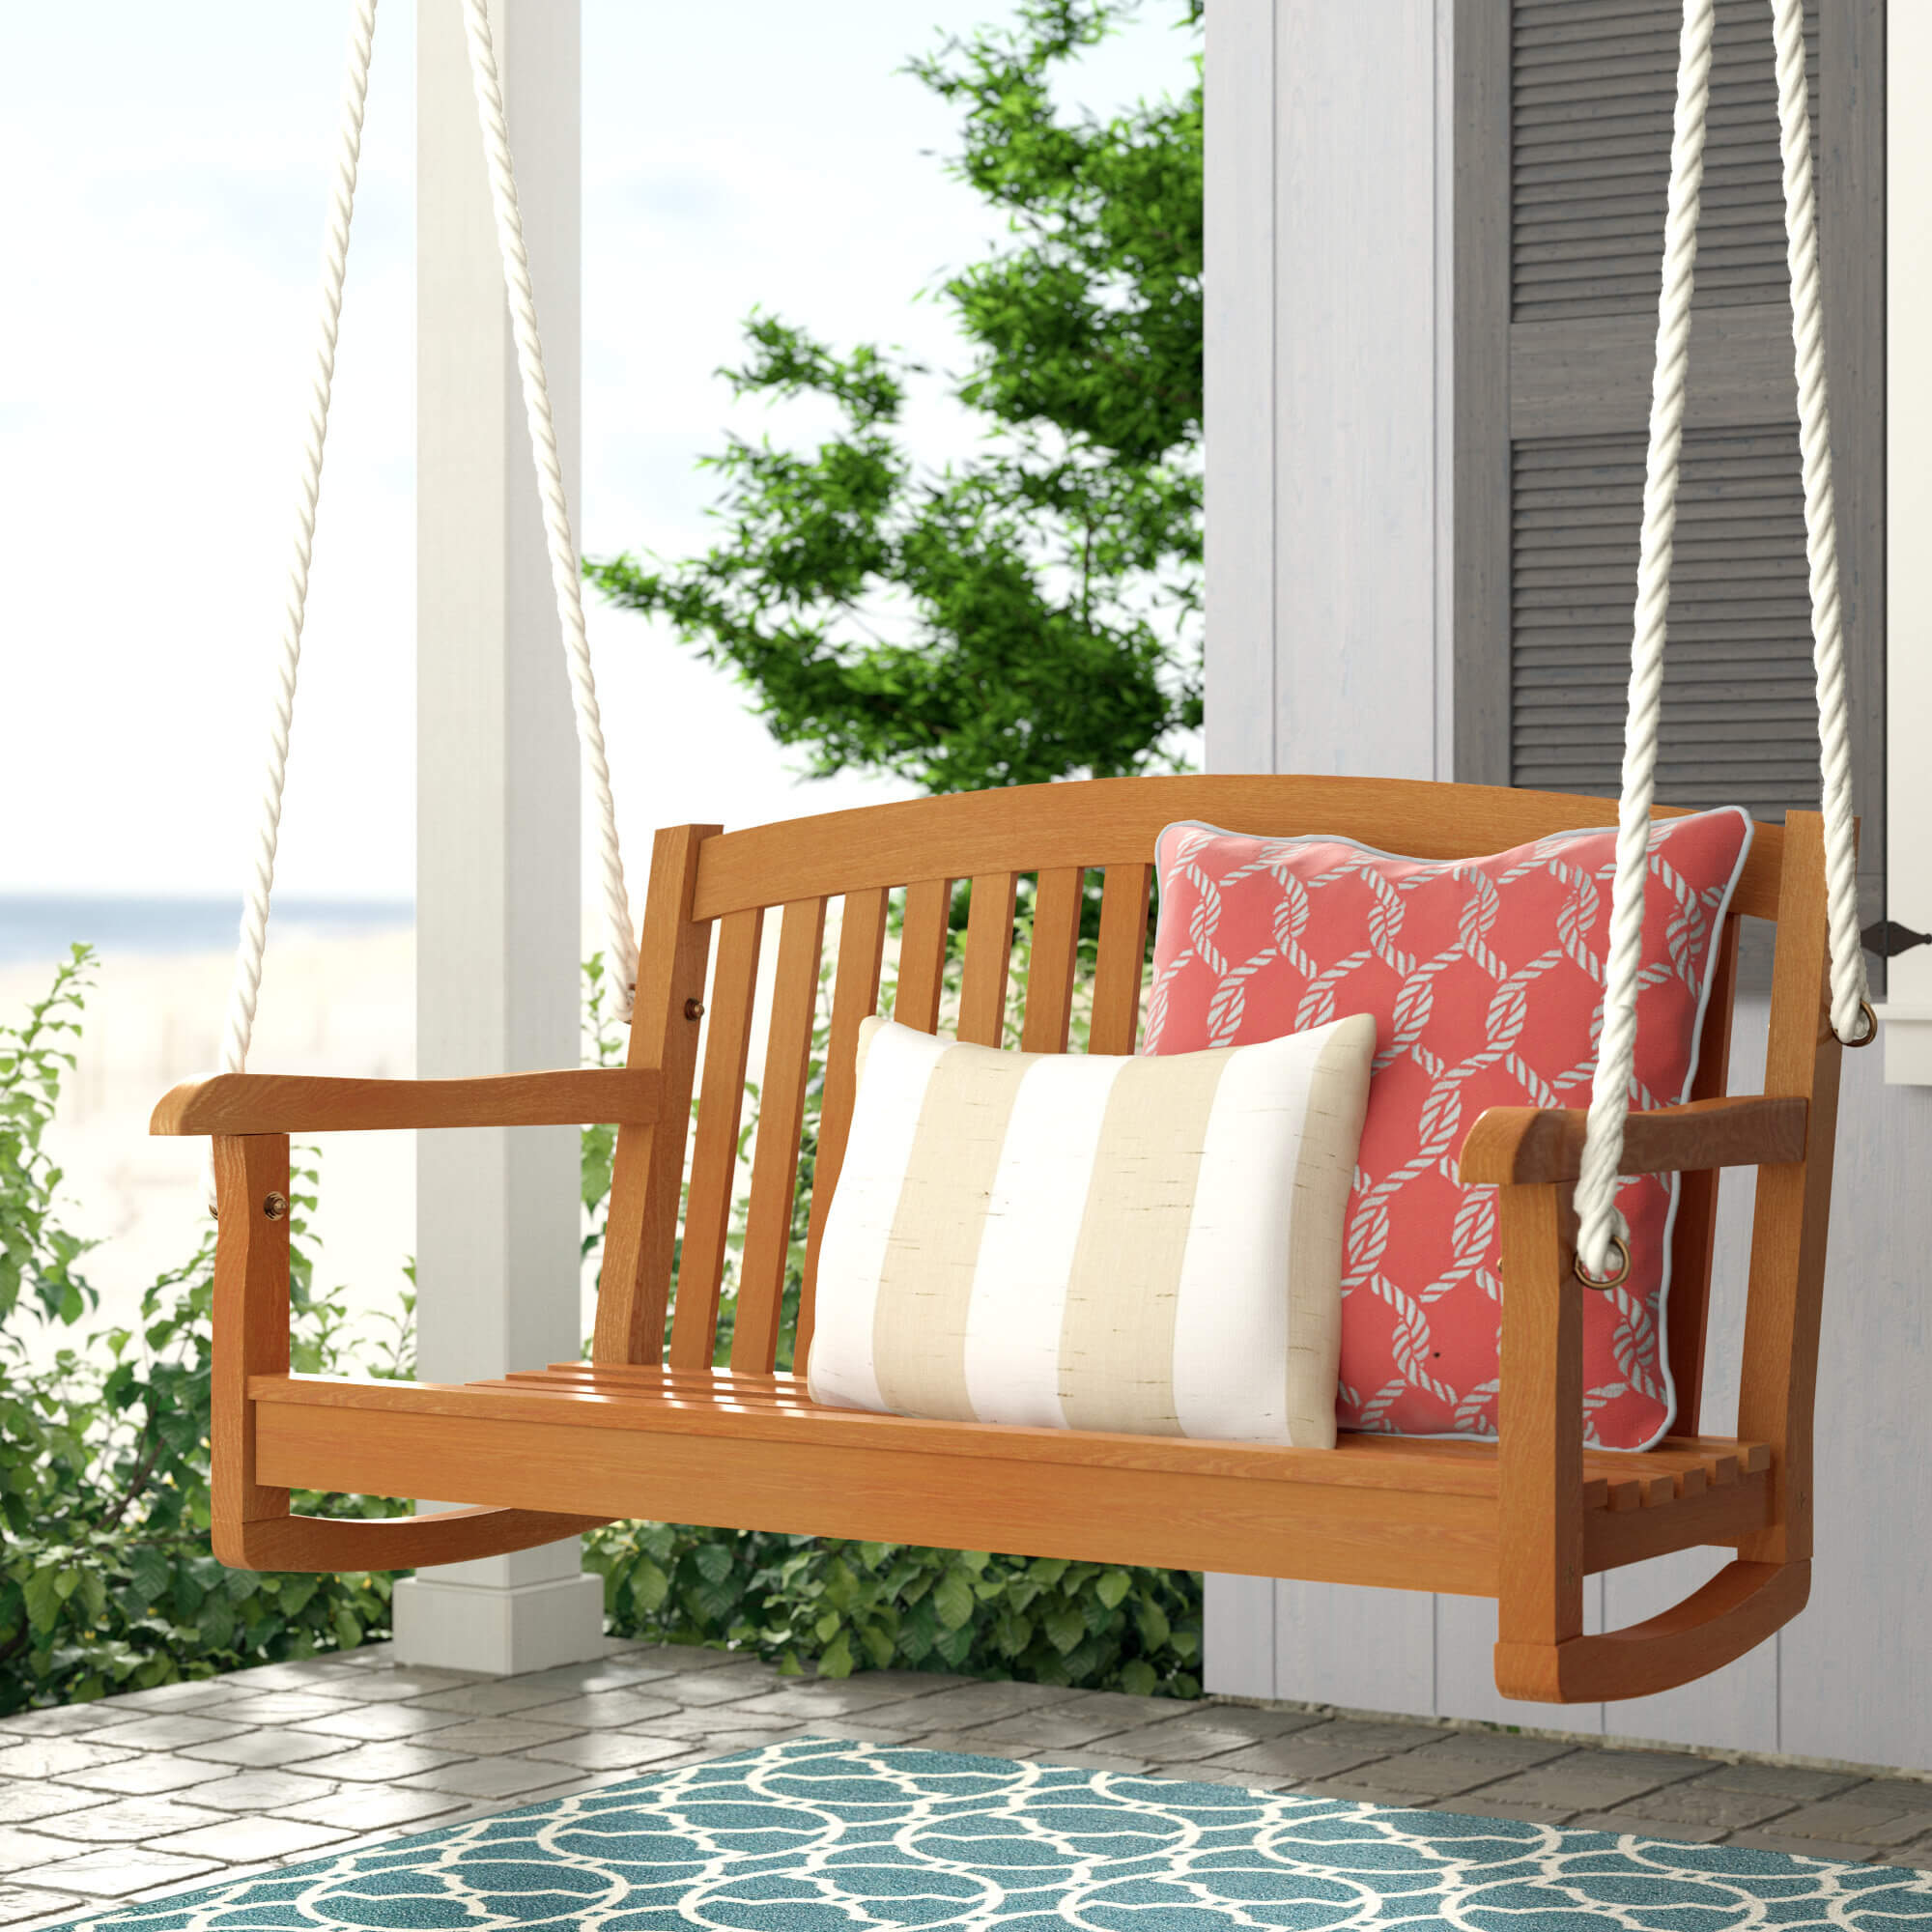 Swing Chair or Floor Pillows To Maximize Patio